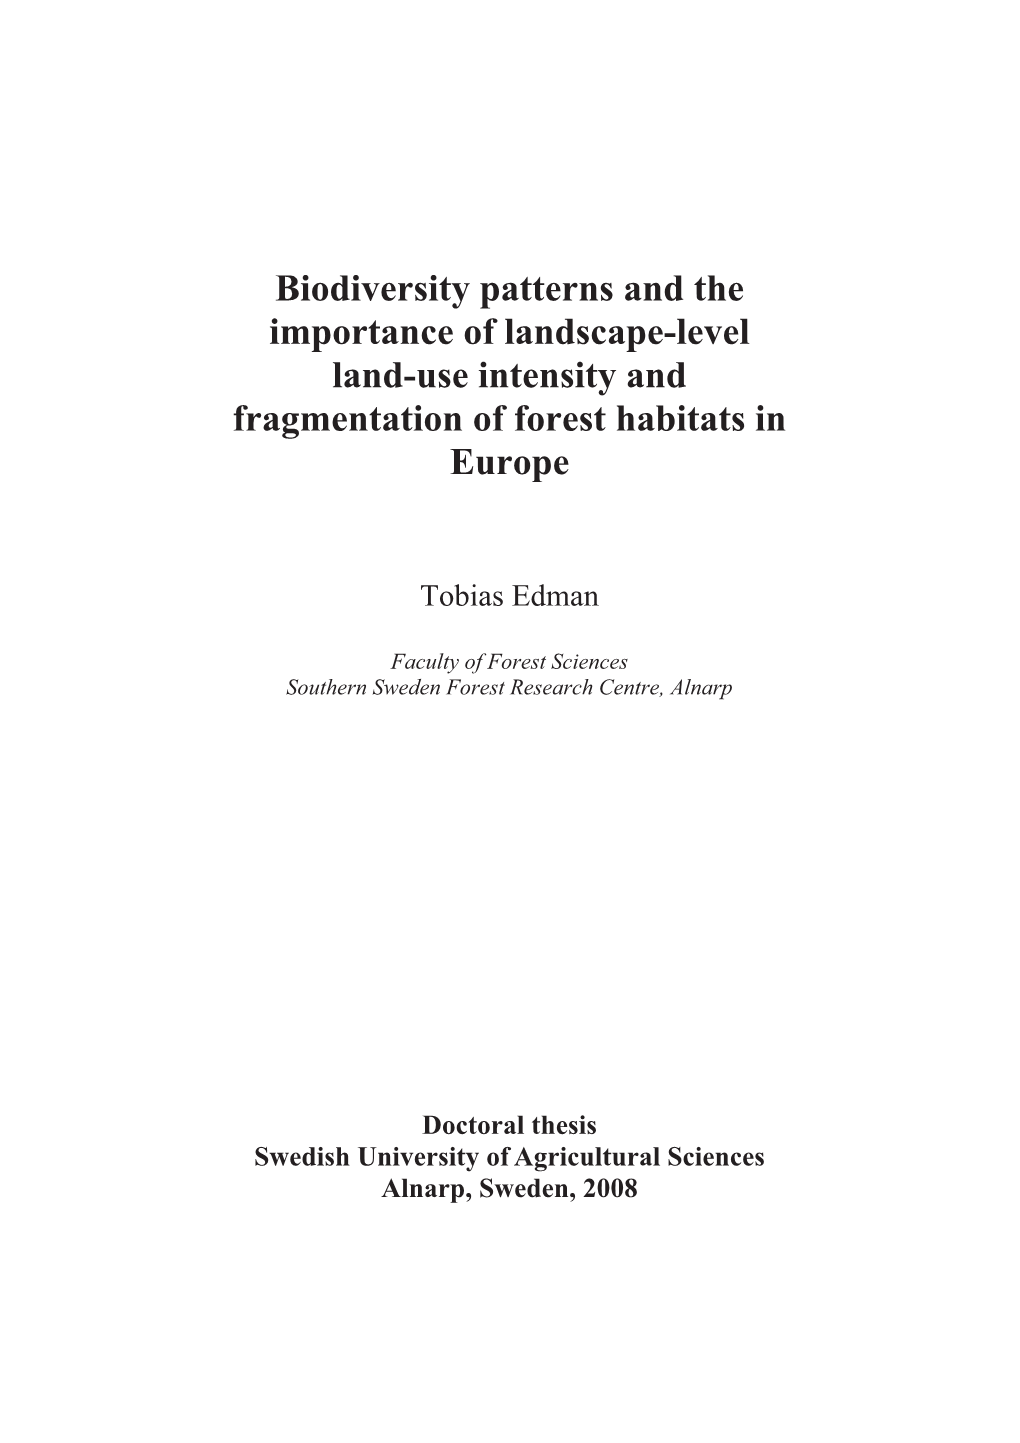 Biodiversity Patterns and the Importance of Landscape-Level Land-Use Intensity and Fragmentation of Forest Habitats in Europe